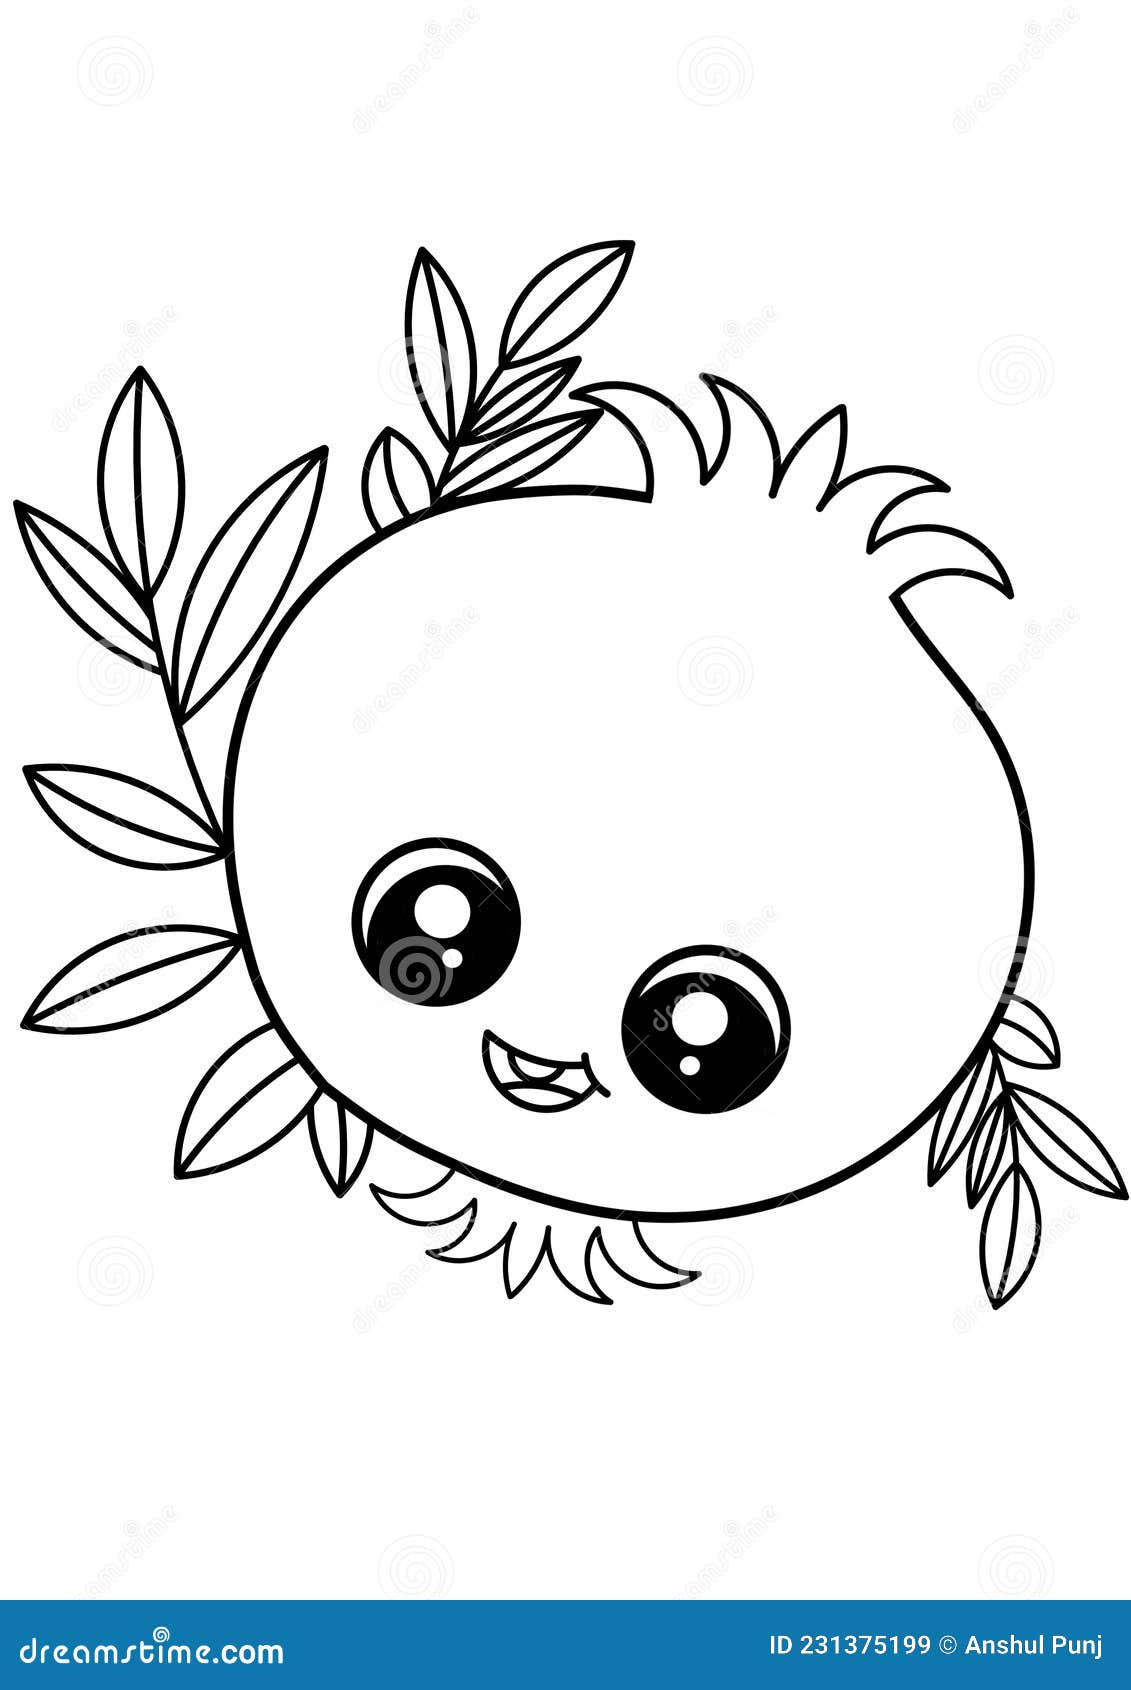 Red Cute Pomegranate Cartoon Image for Coloring Book Publishing ...